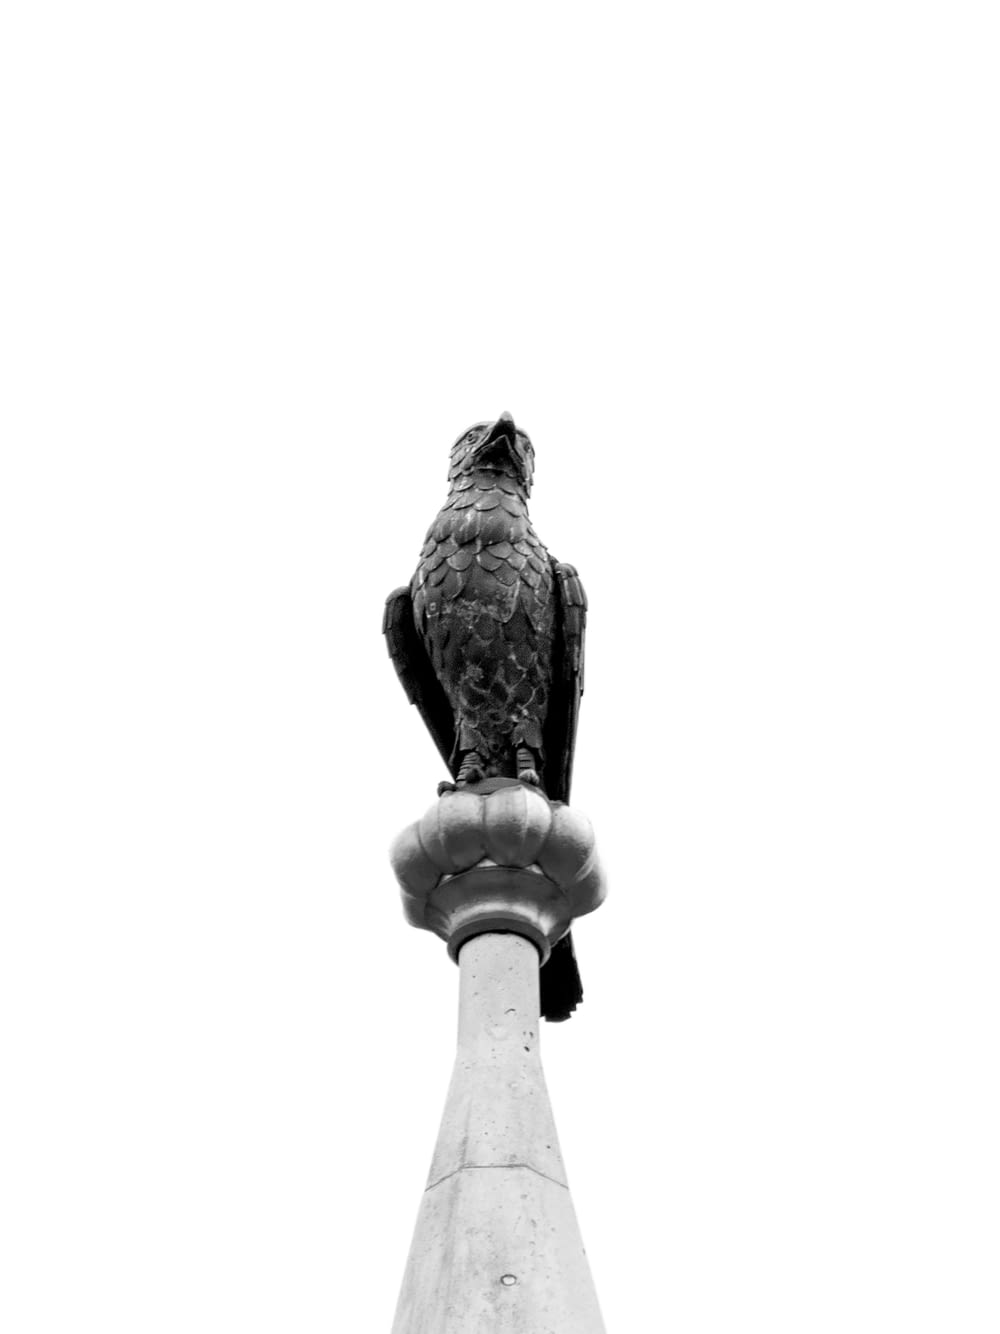 a black and white photo of a bird perched on top of a pole